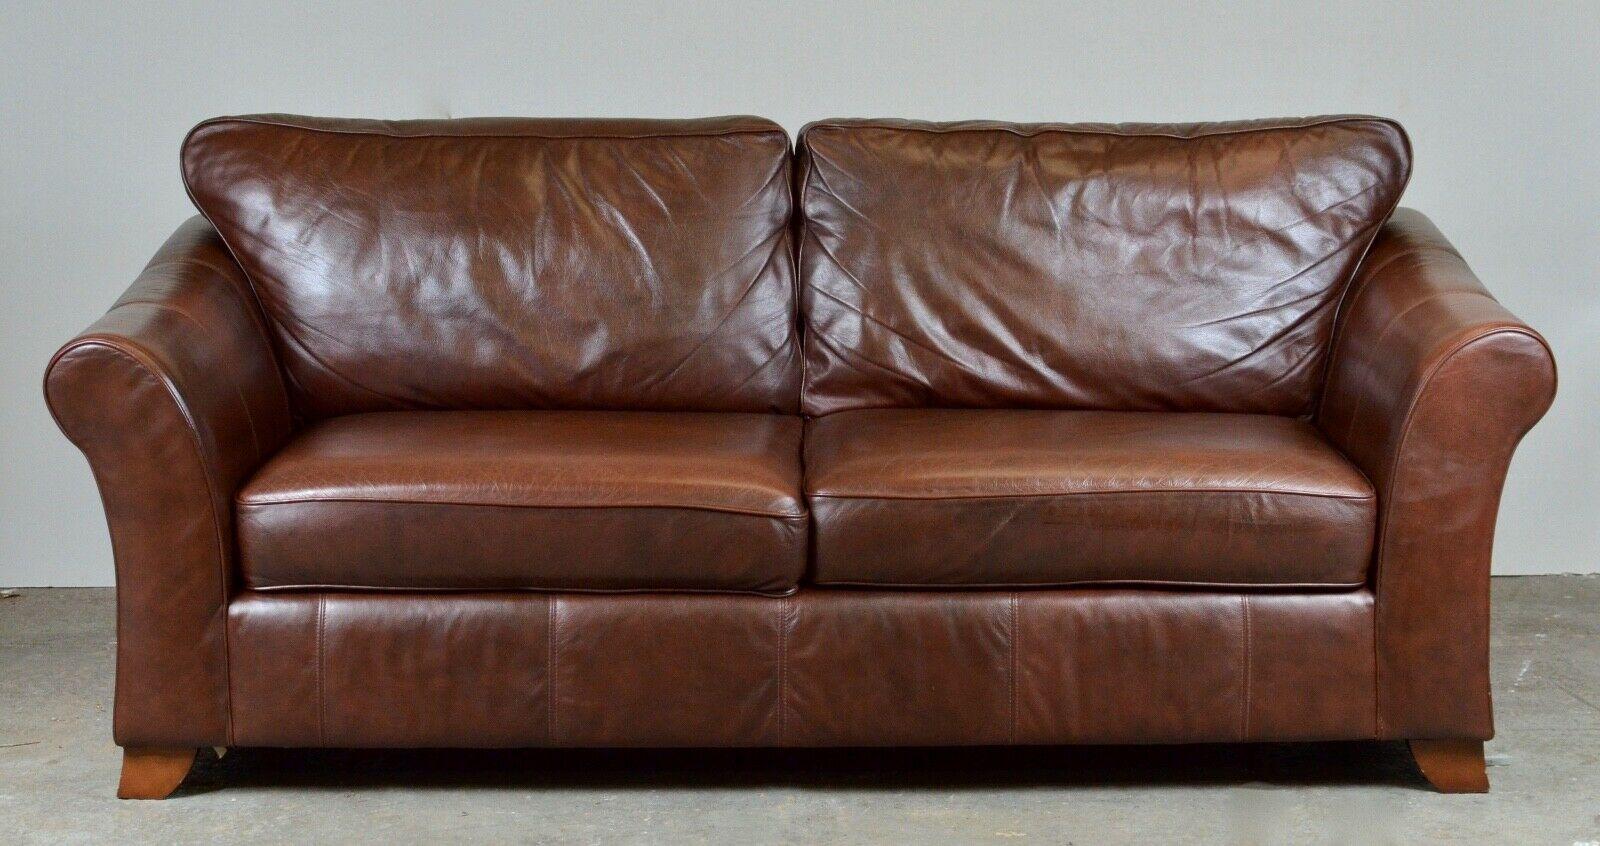 British Marks & Spencer Abbey 3 Seater Brown Leather Sofa / Armchair Available 3